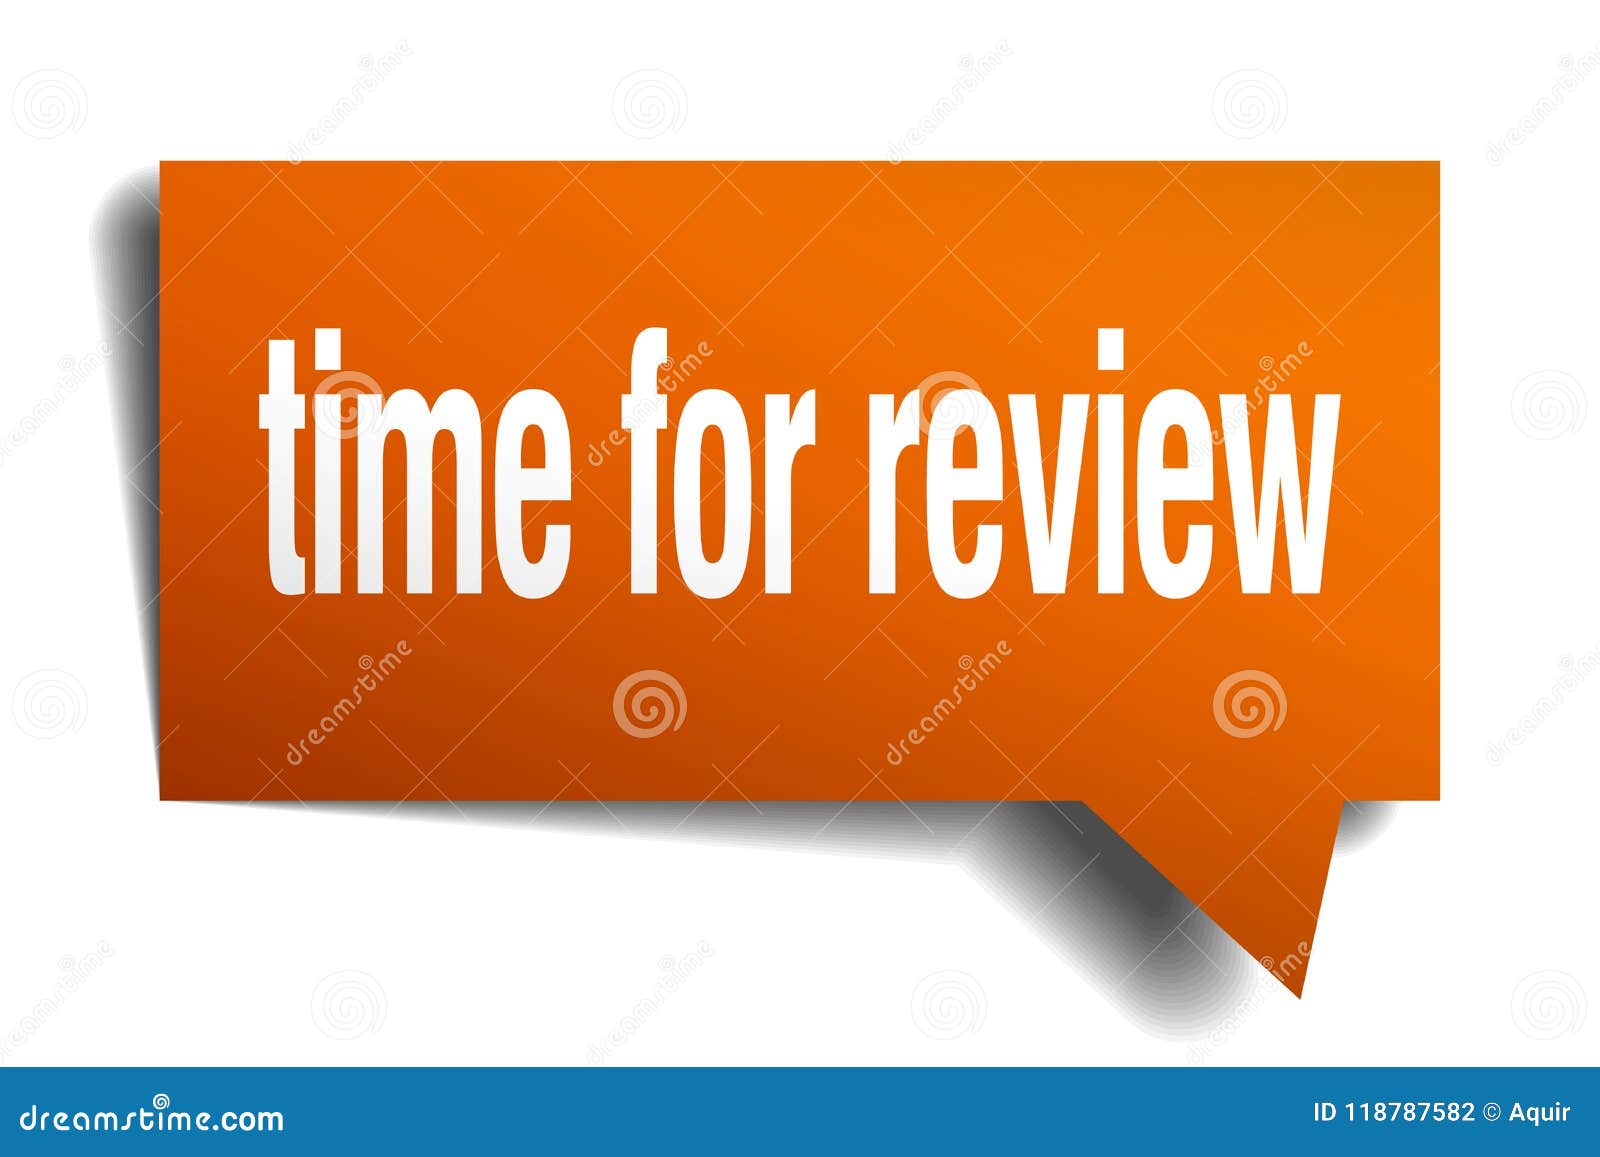 Time for Review Orange 3d Speech Bubble Stock Vector - Illustration of ...